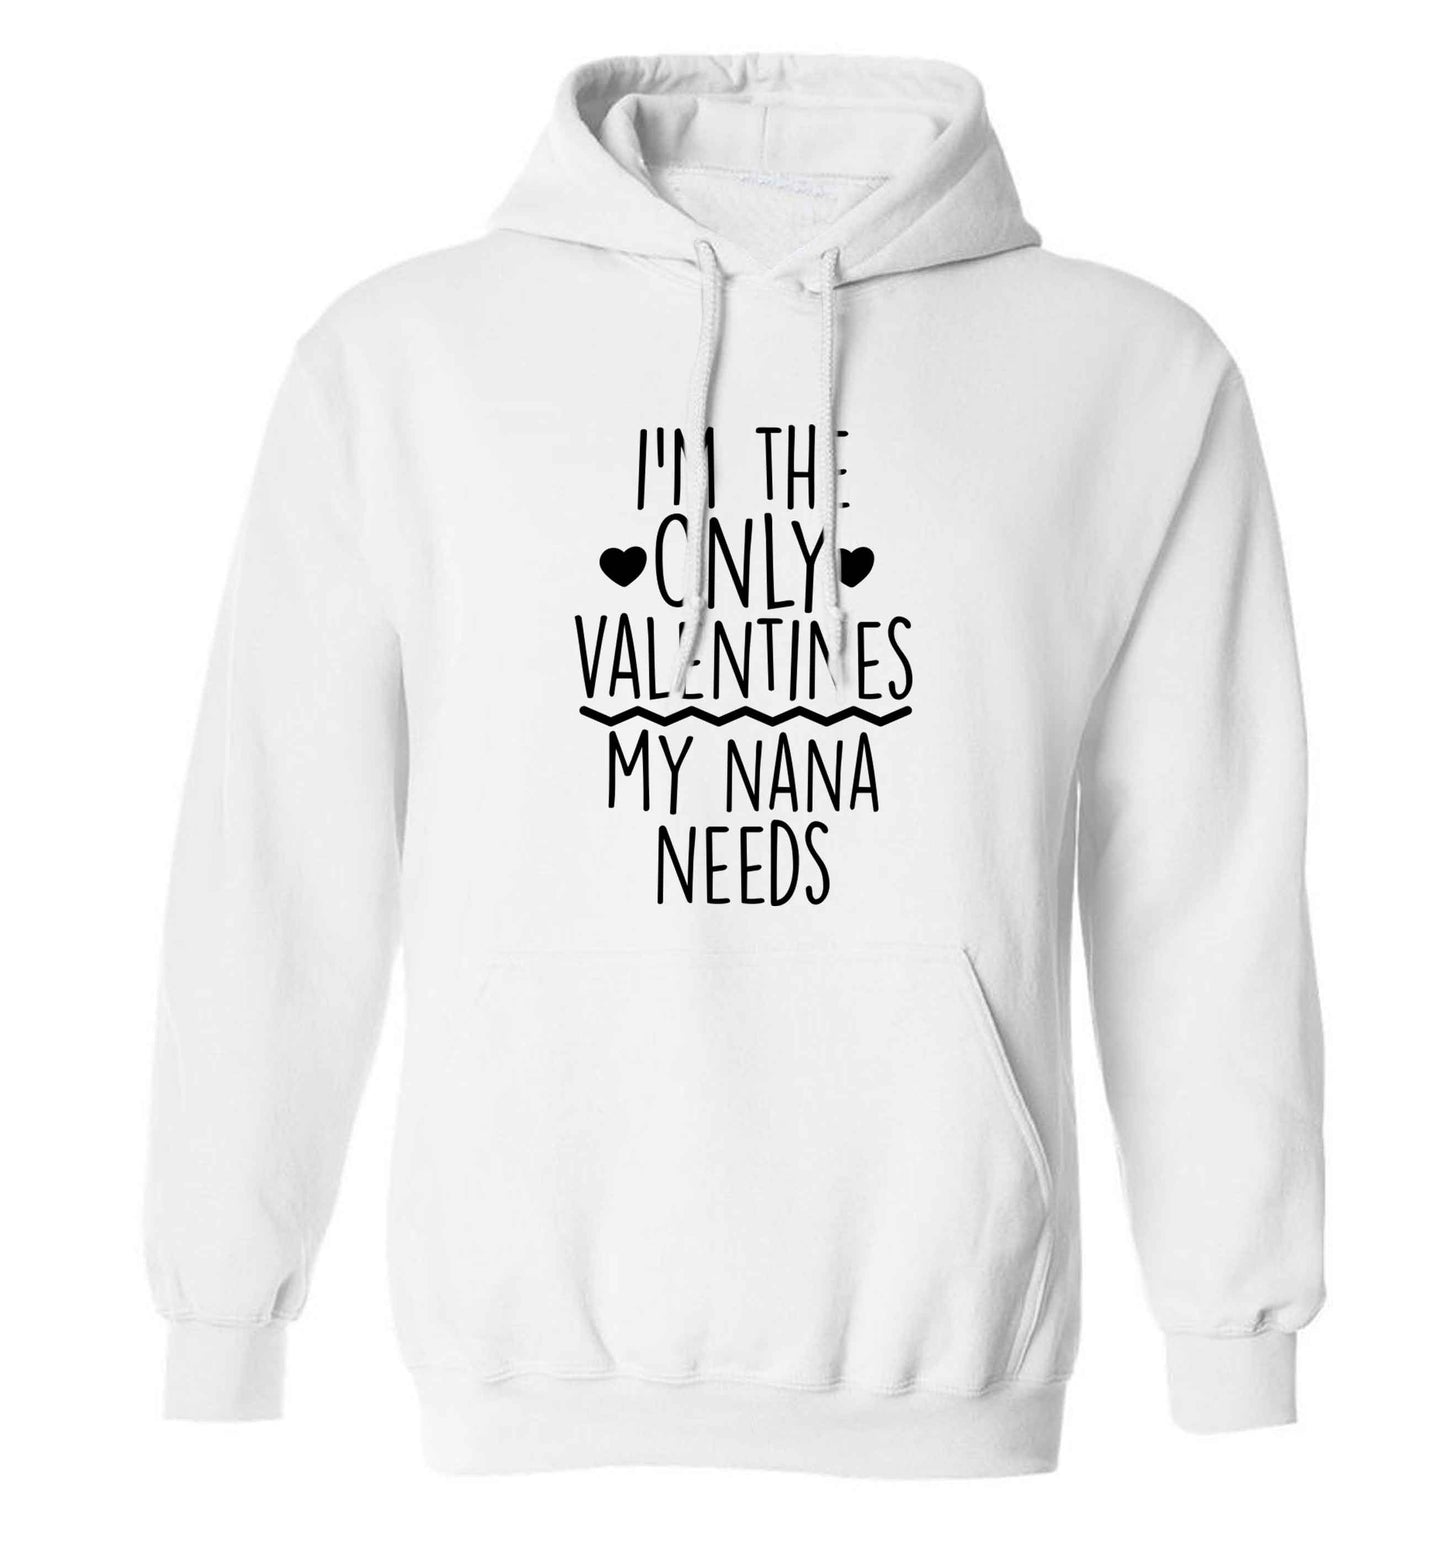 I'm the only valentines my nana needs adults unisex white hoodie 2XL